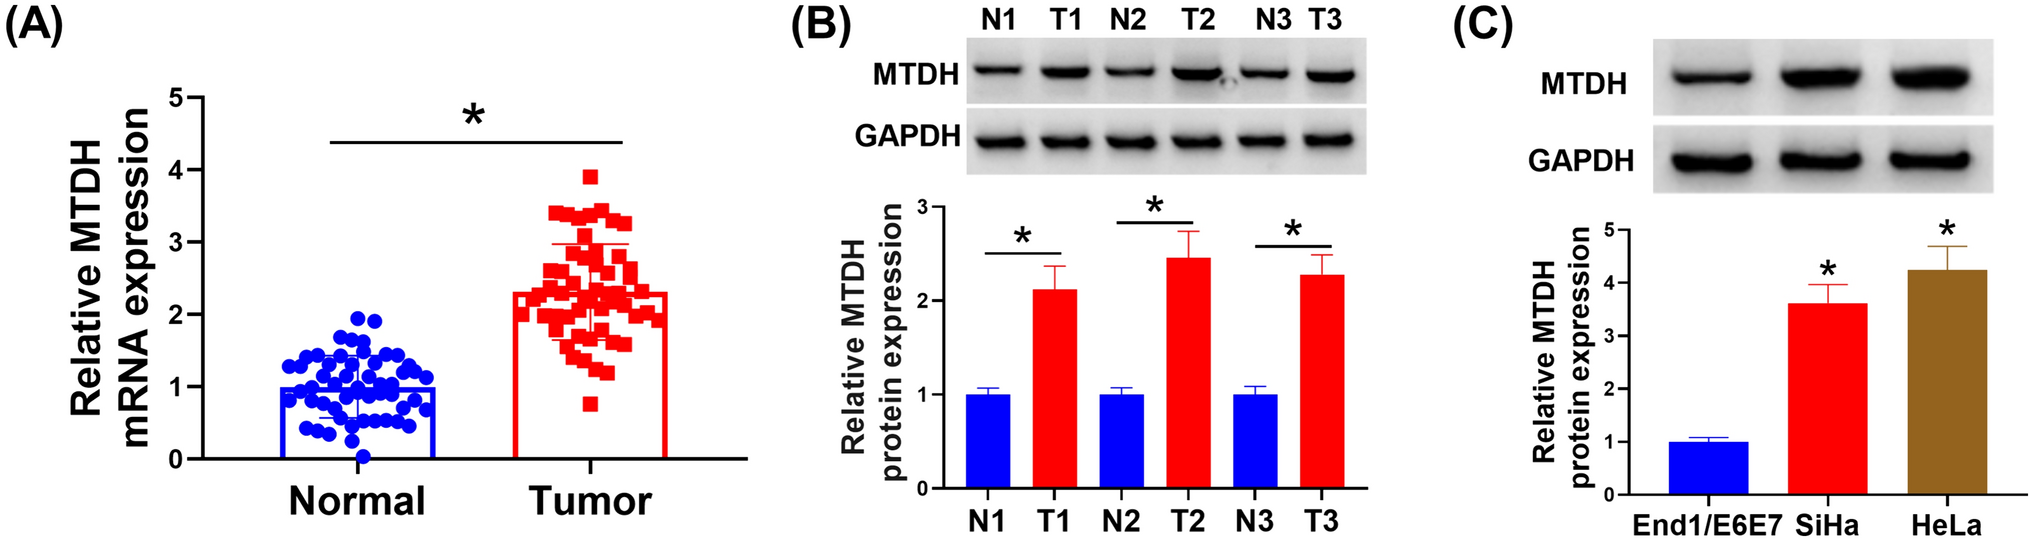 USP7 promotes cervical cancer progression by stabilizing MTDH expression through deubiquitination